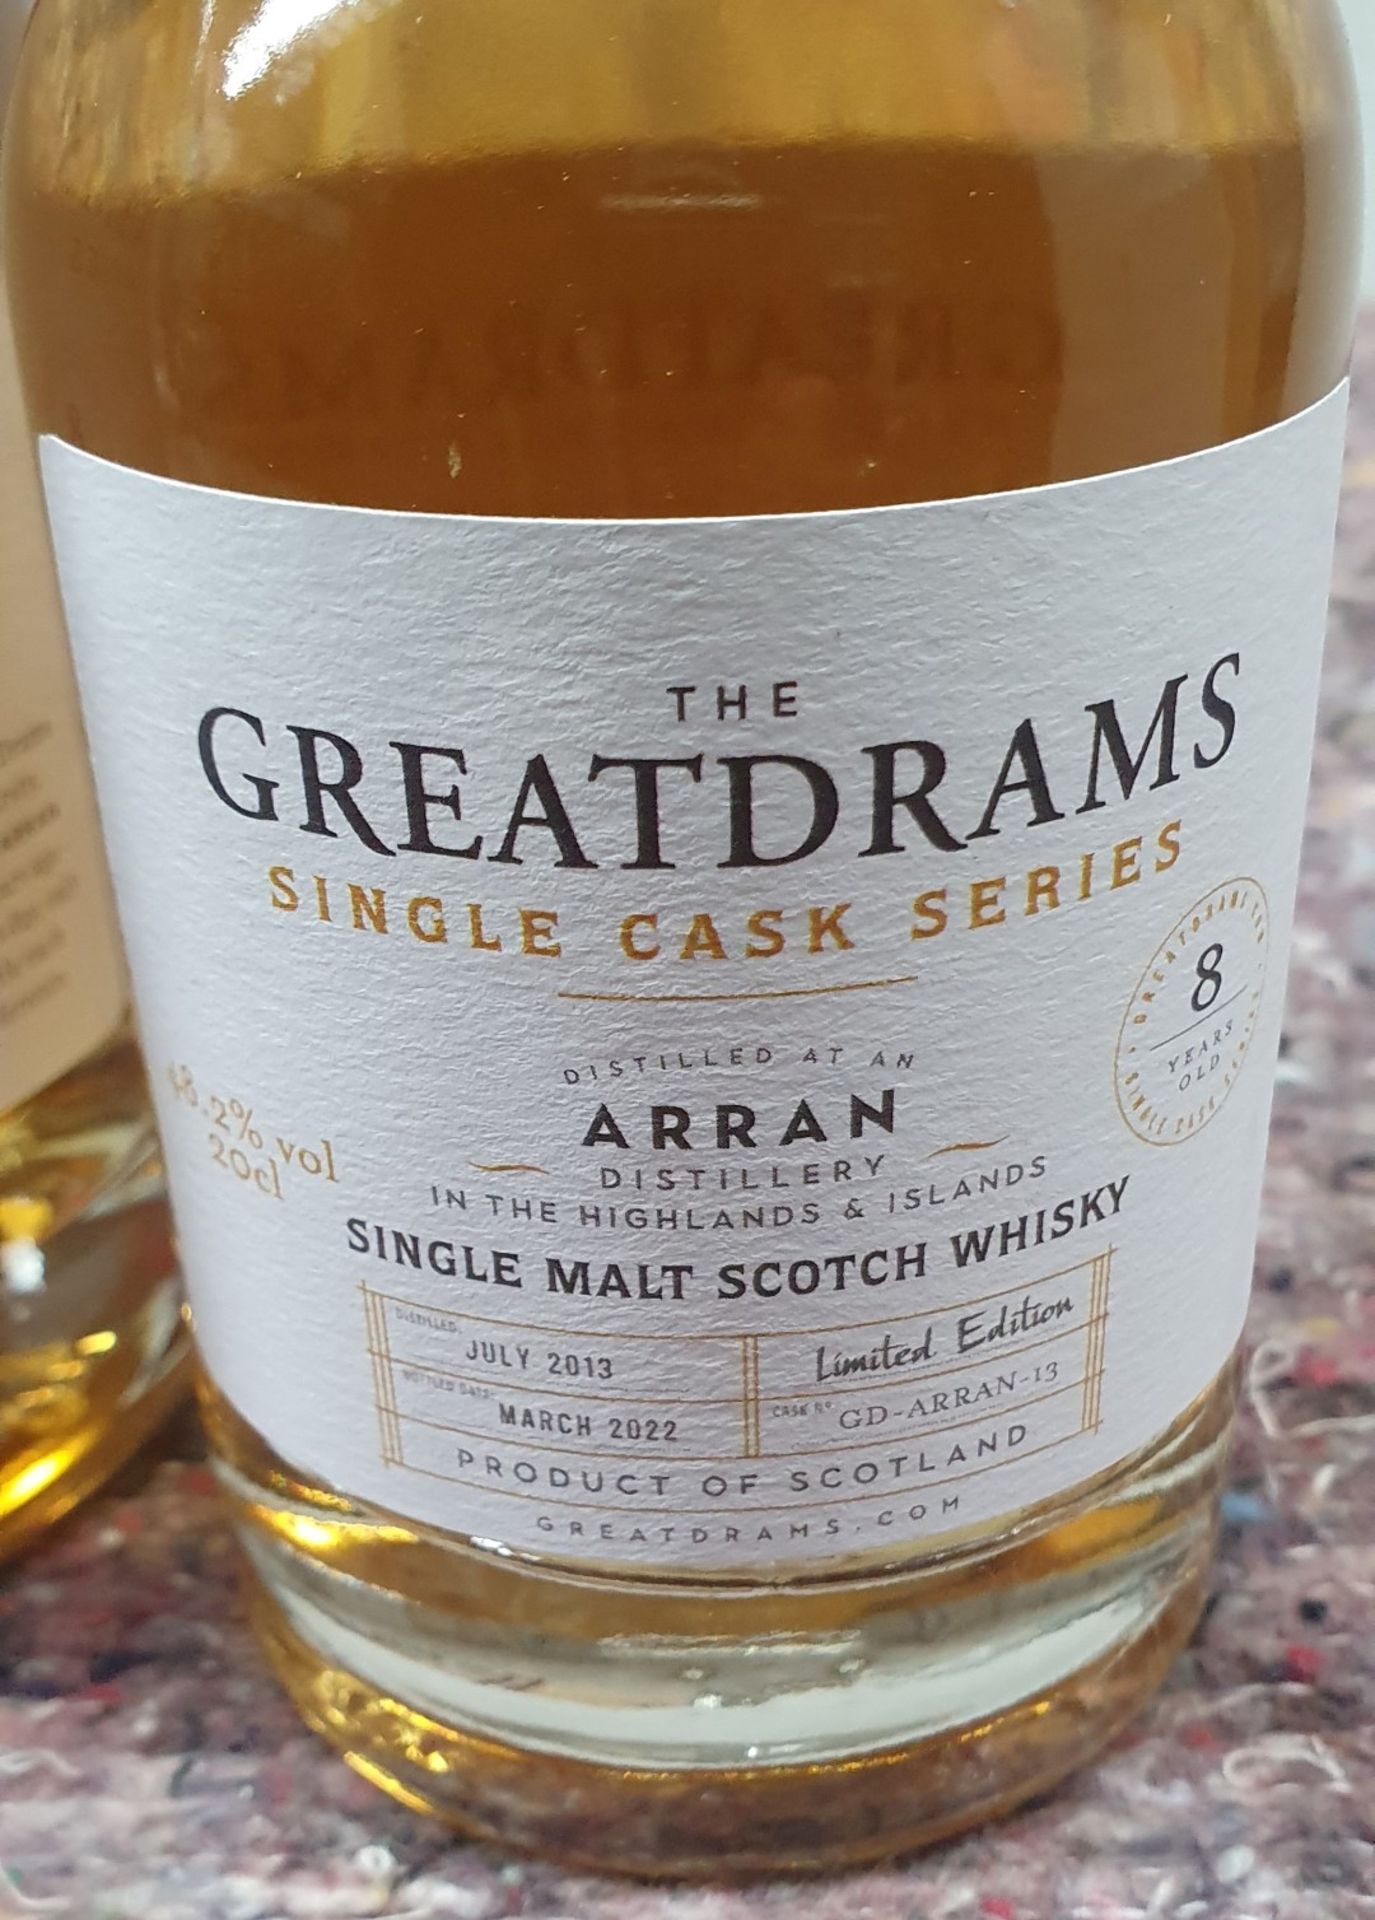 2 x Bottles of Greatdrams Single Cask Series Arran Single Malt Scotch Whisky - Includes 20cl and - Image 2 of 4